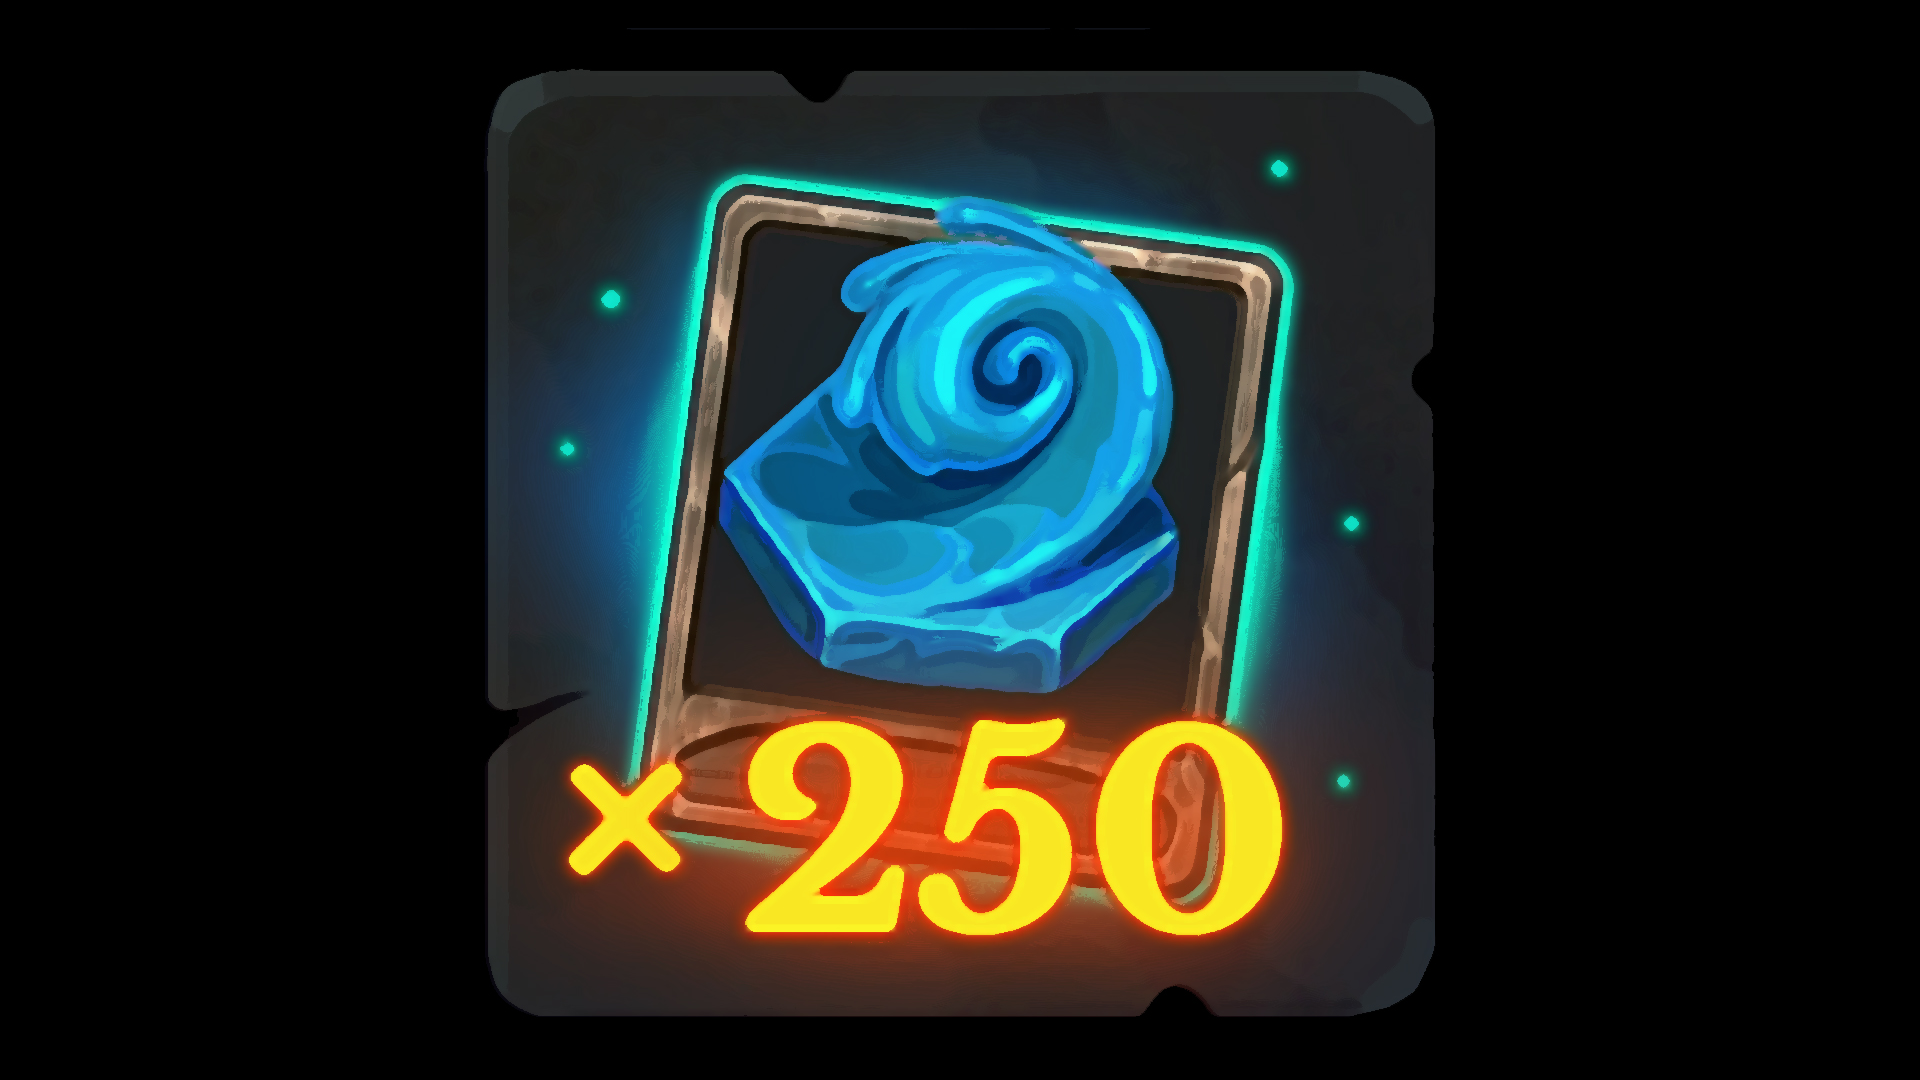 Icon for Deep blue